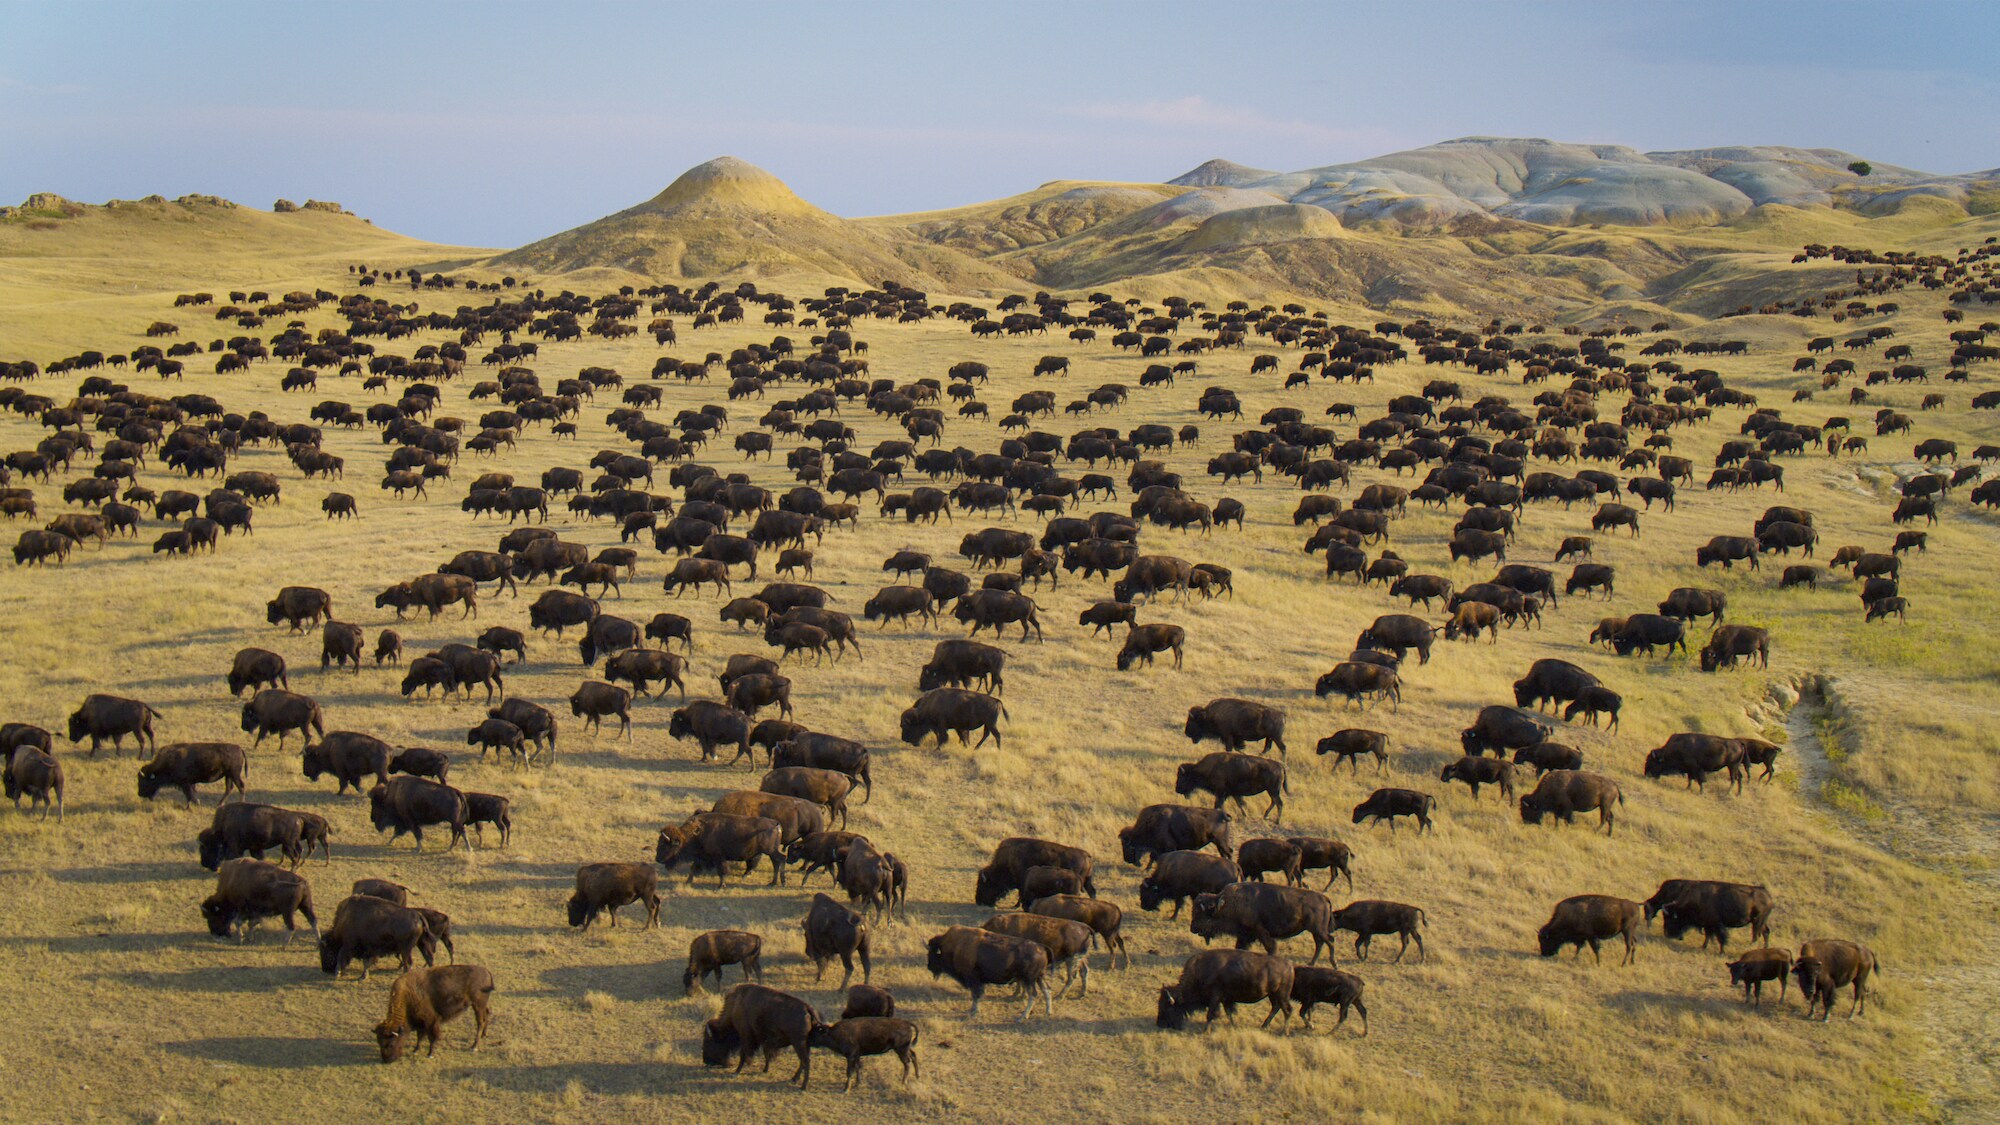 A bison herd migrates across the grassland. (National Geographic for Disney+)